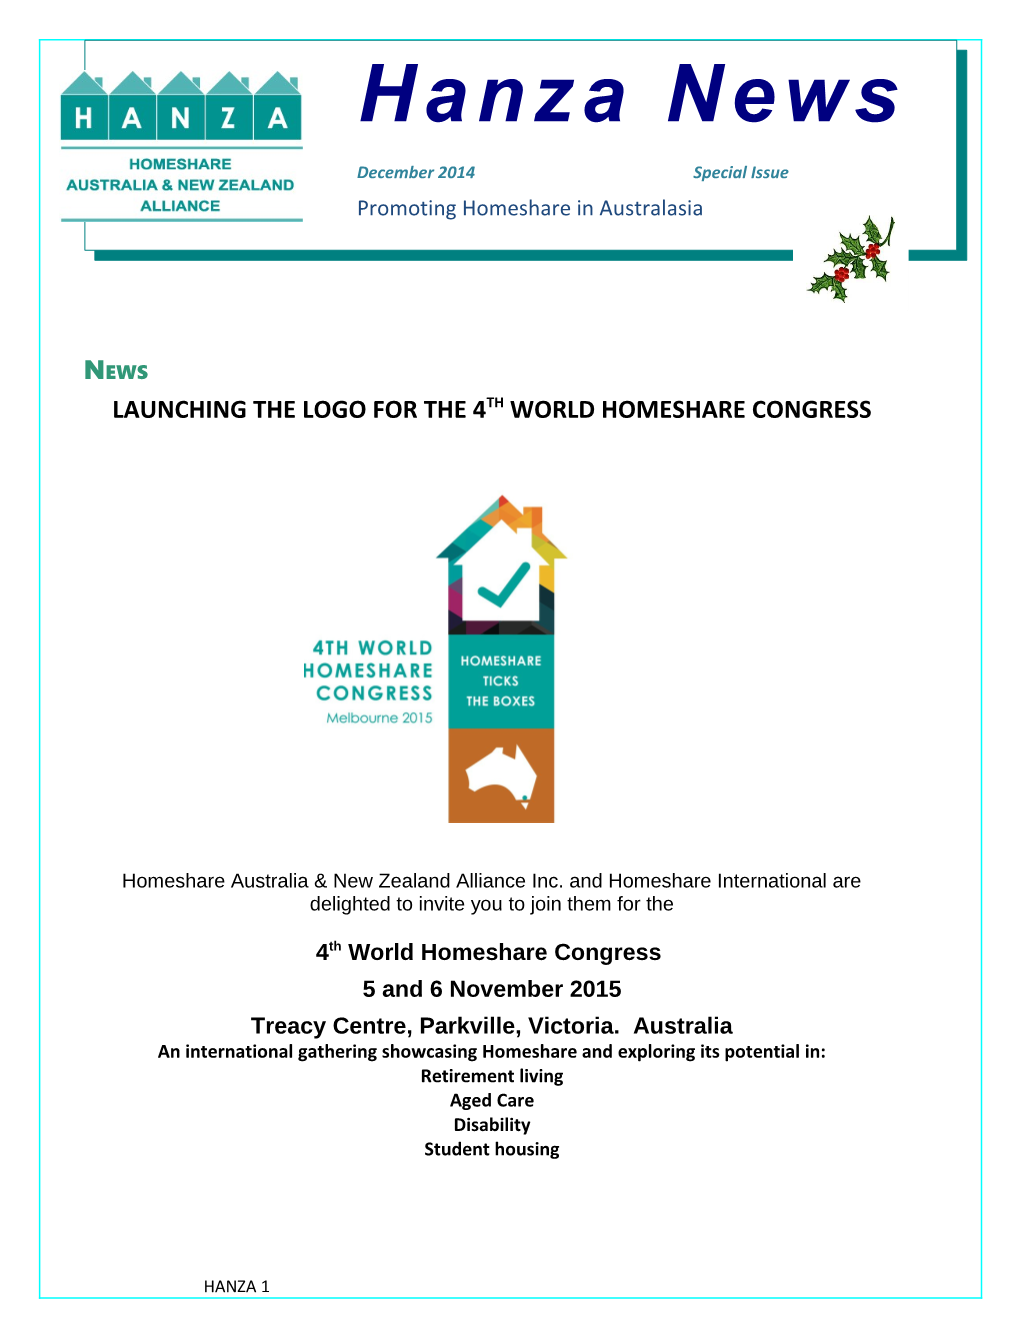 Launching the Logo for the 4Th World Homeshare Congress